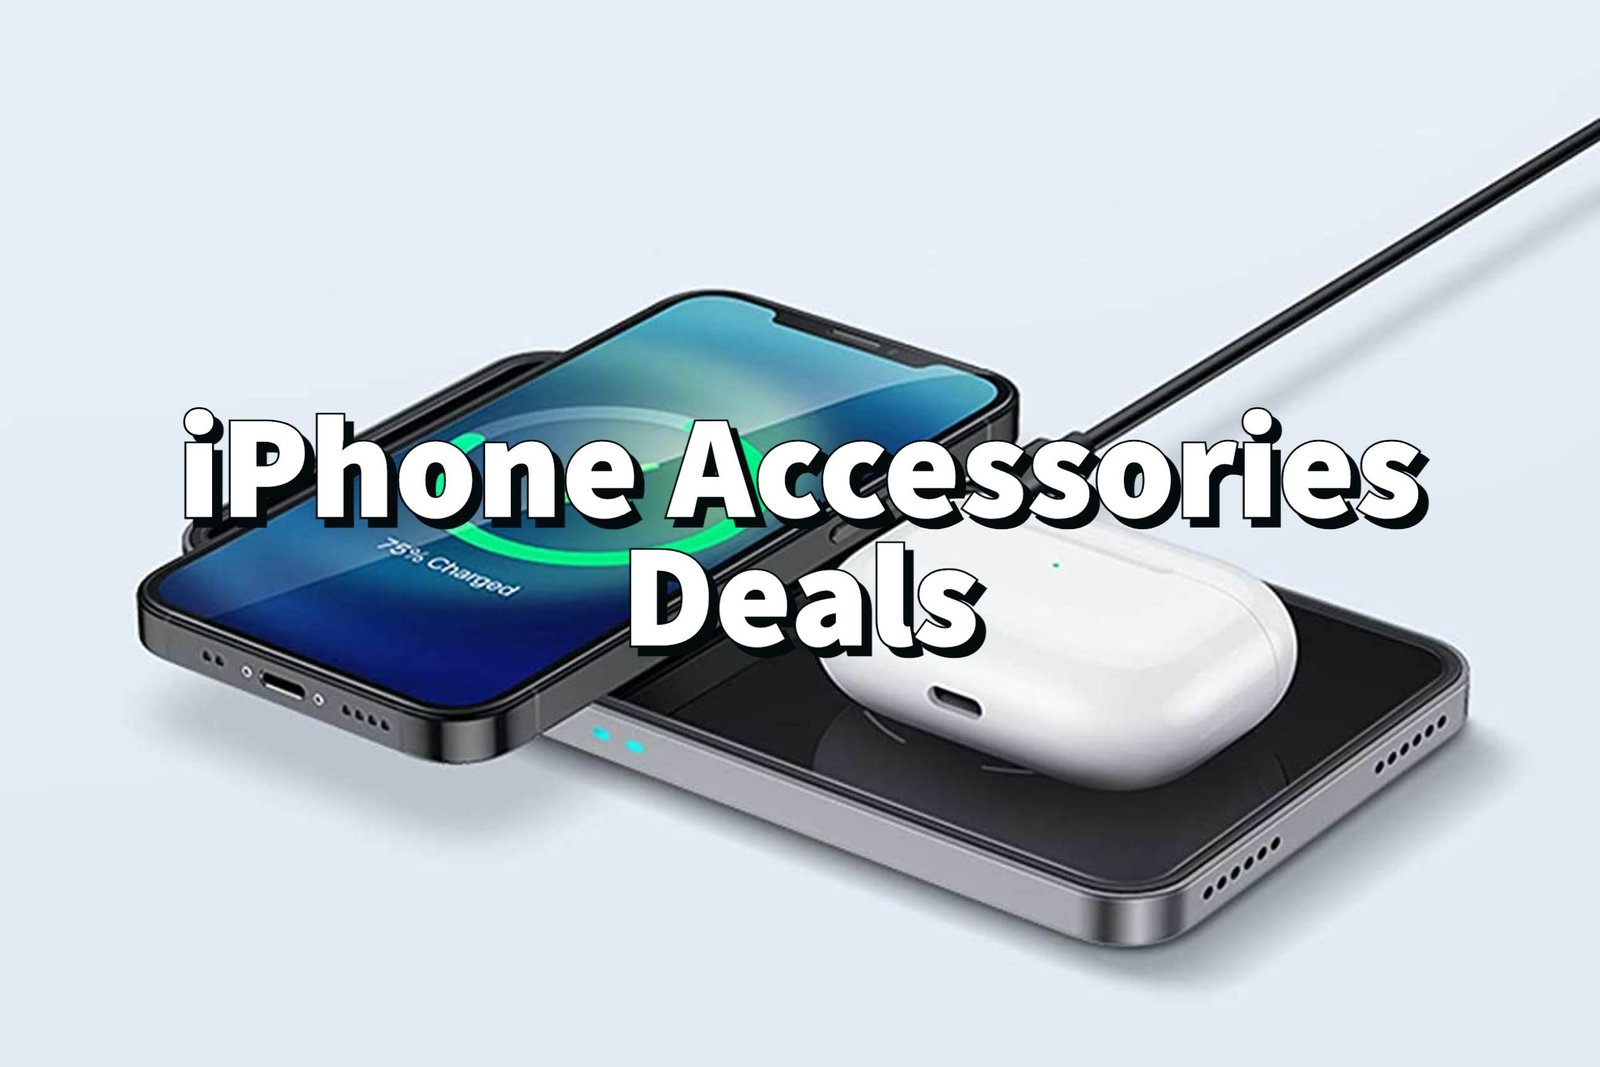 iPhone Accessory Deal